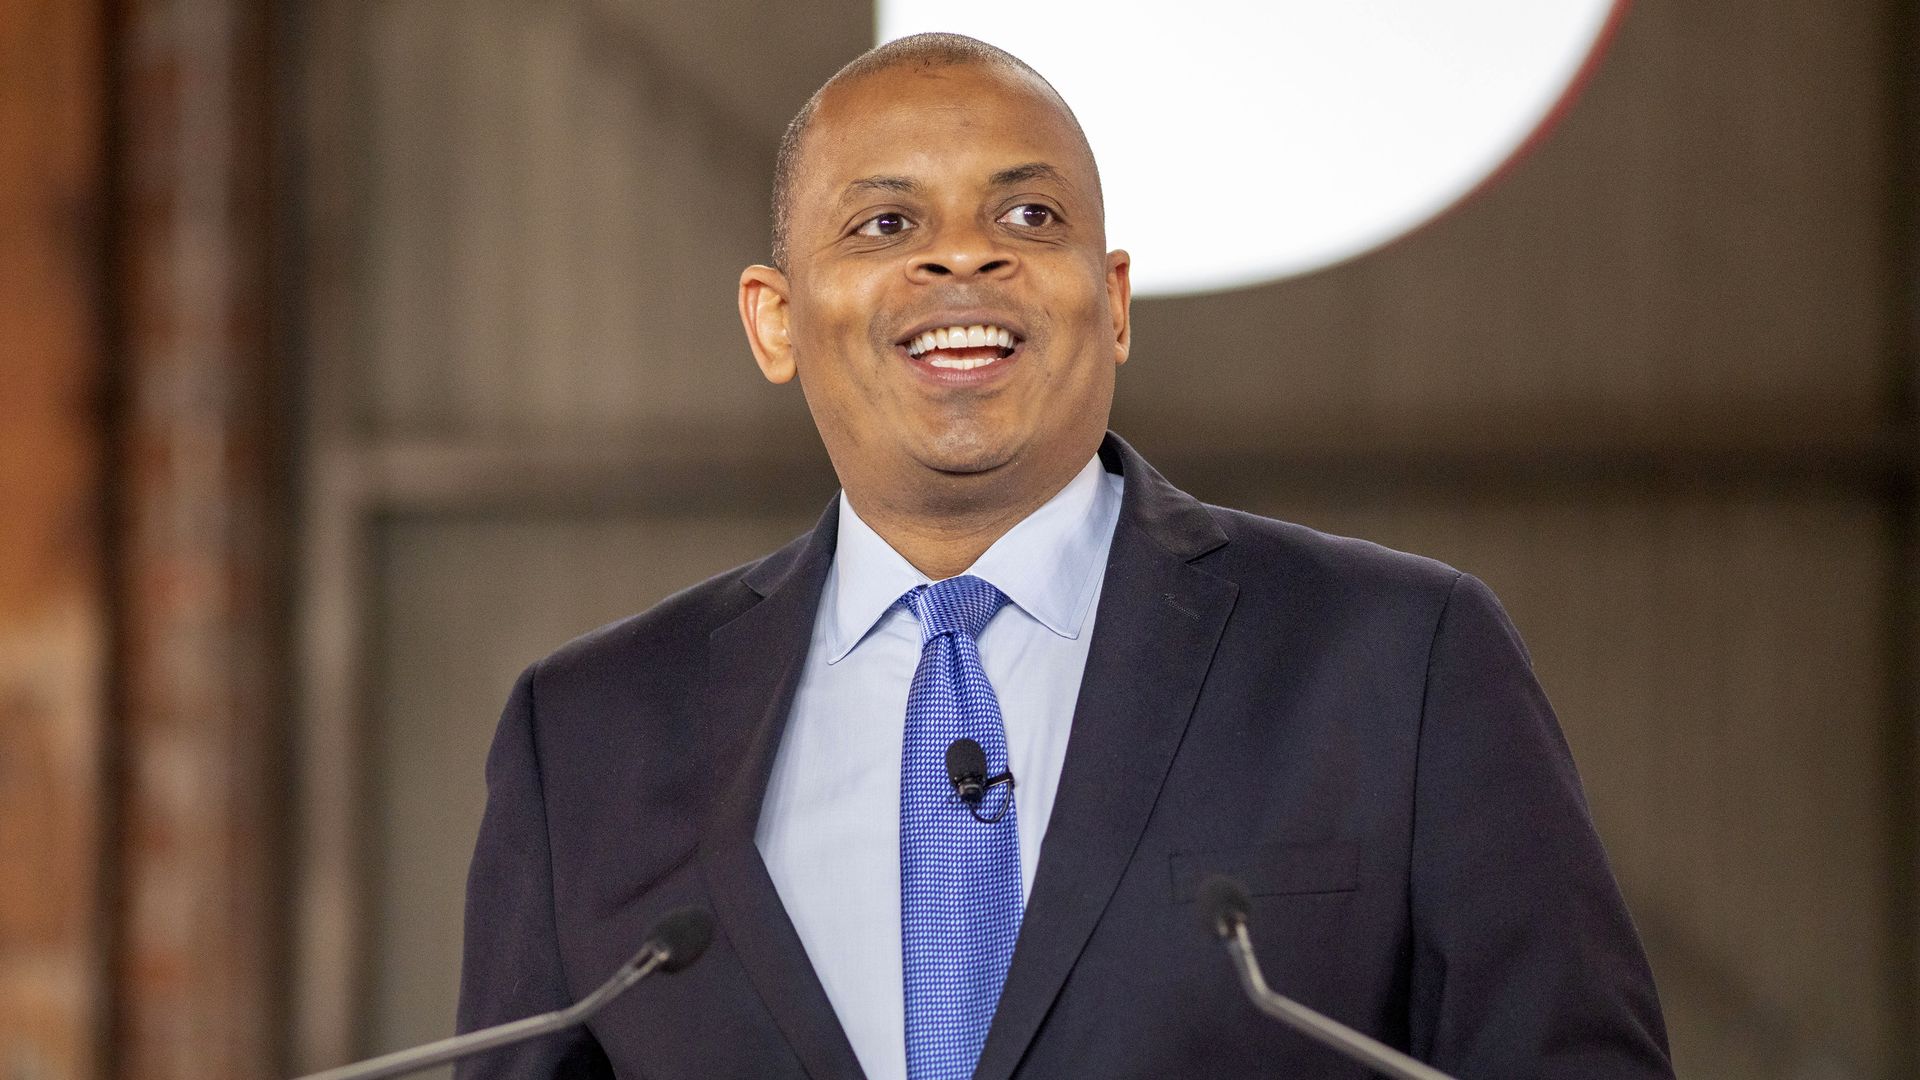 Anthony Foxx is seen at a lectern.